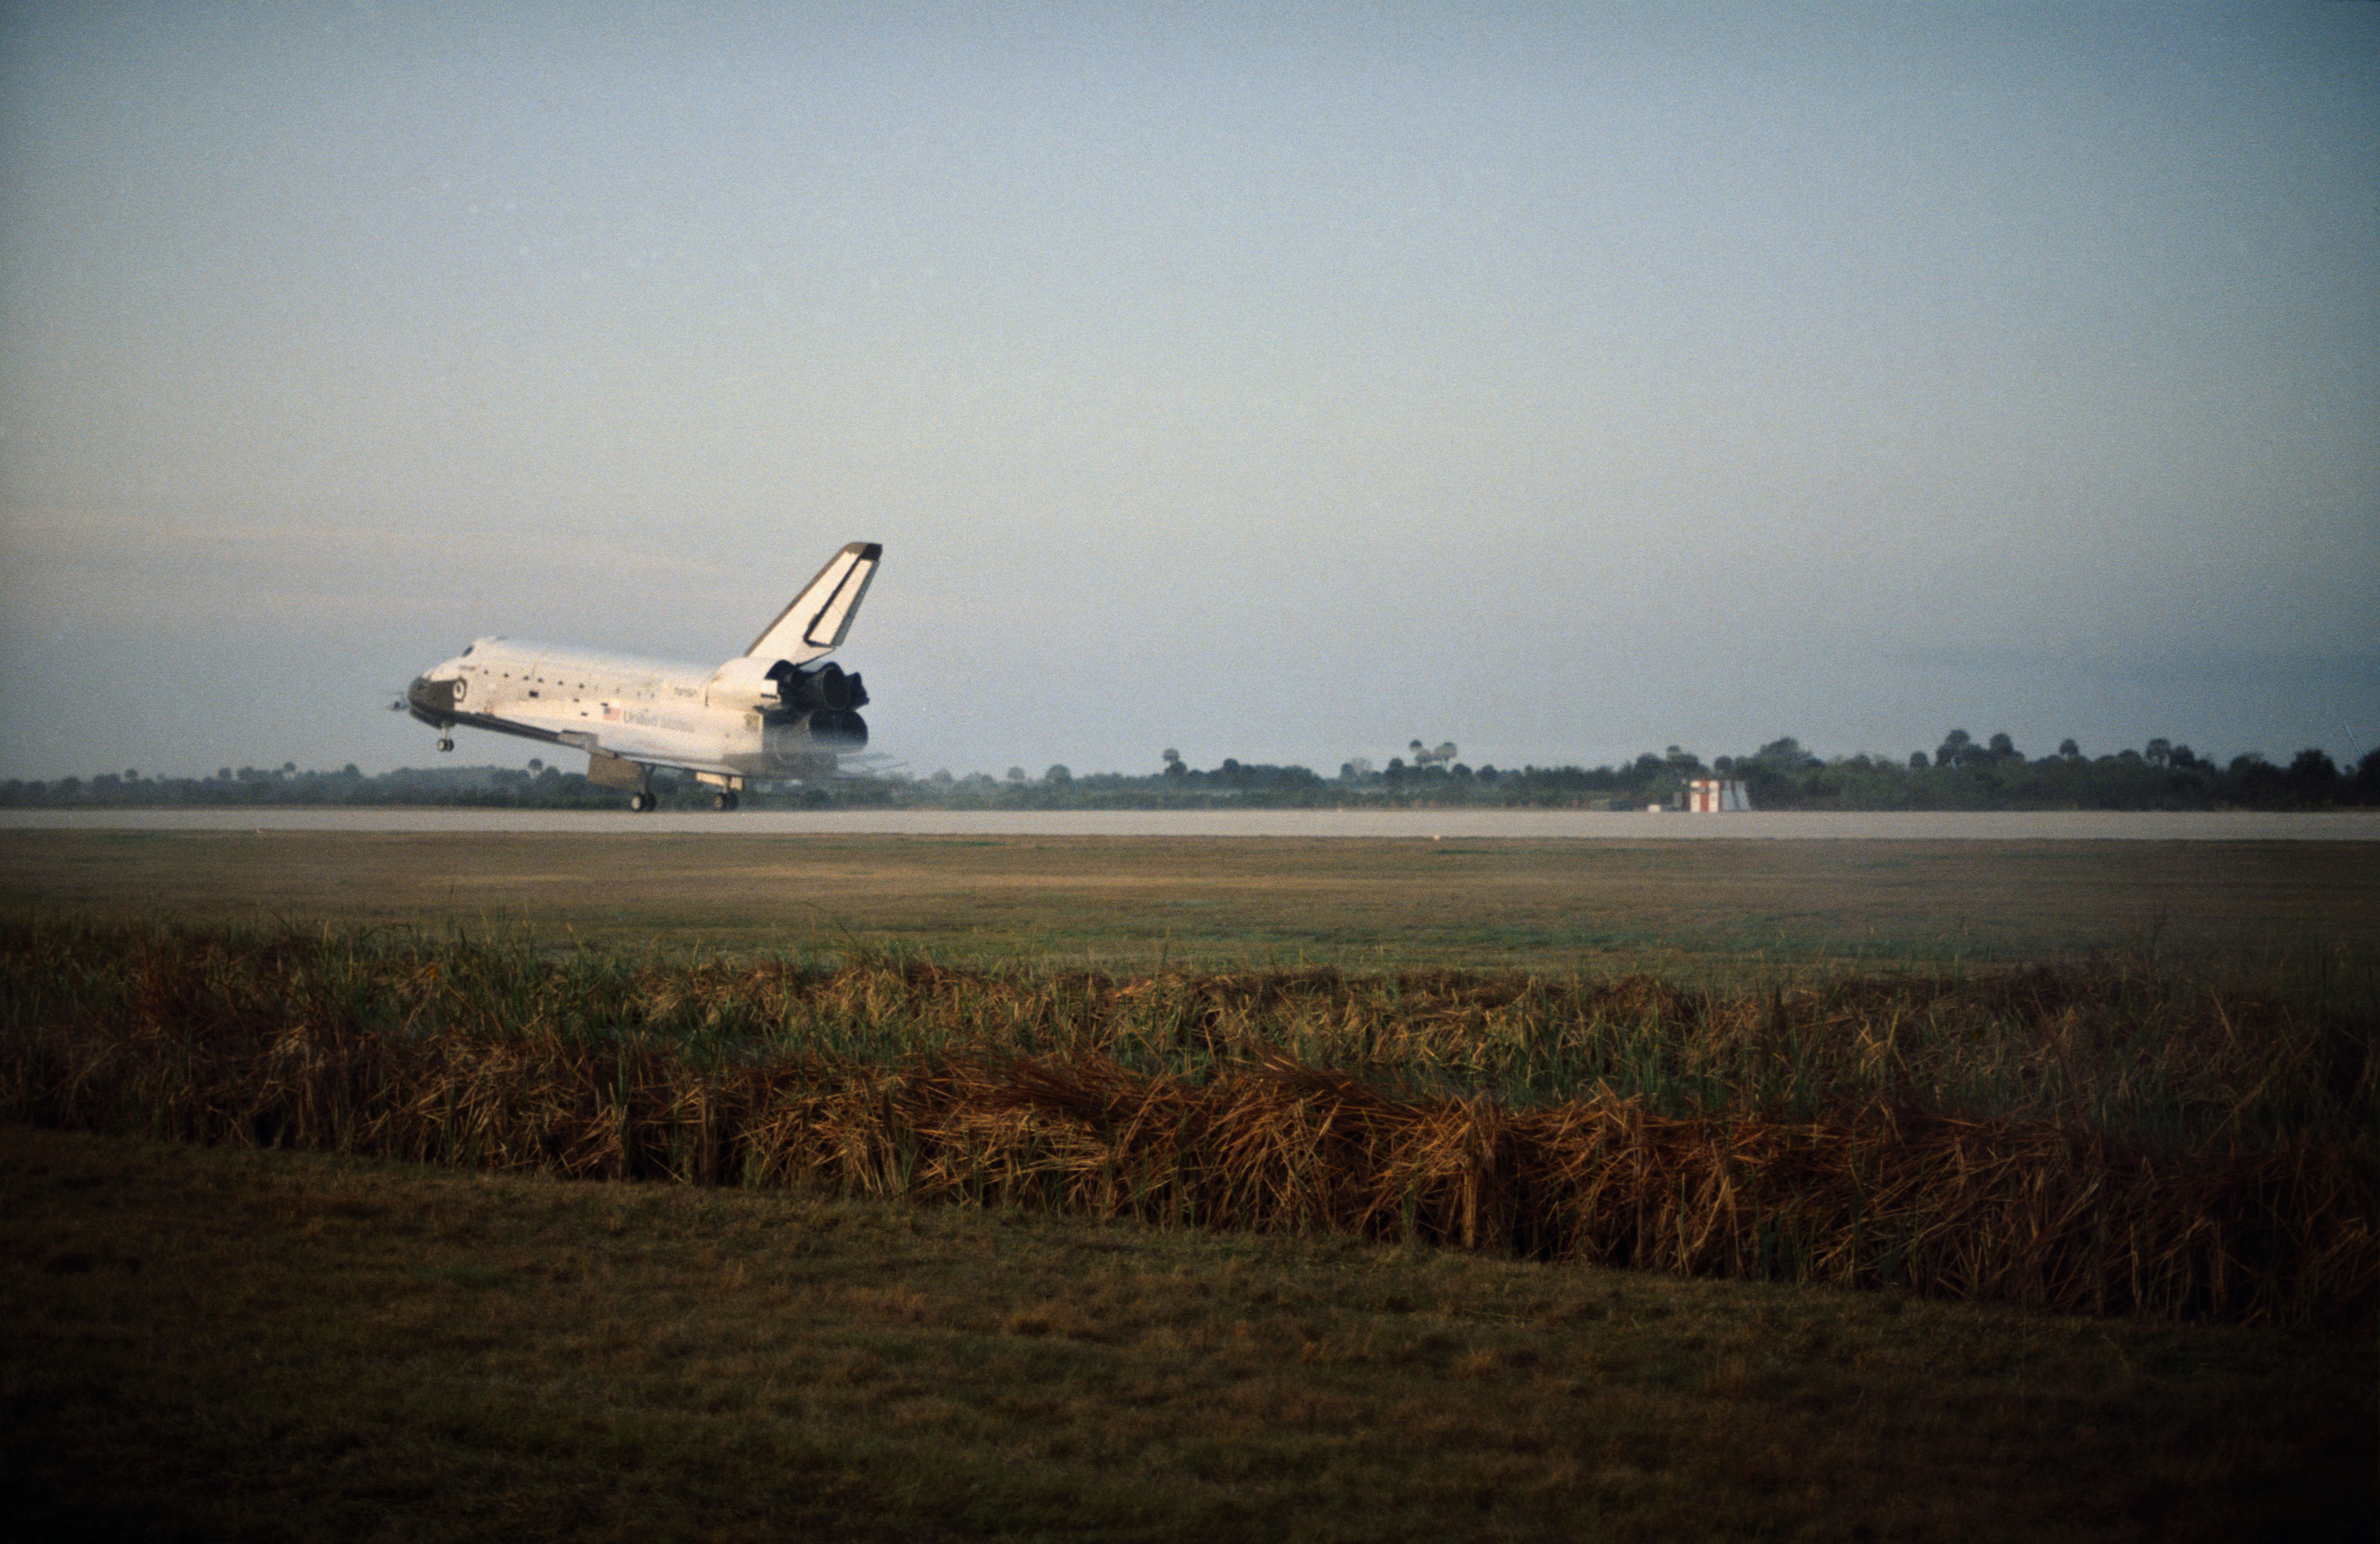 Space shuttle Challenger rolls down the Shuttle Landing Facility (SLF) at NASA’s Kennedy Space Center (KSC) in Florida